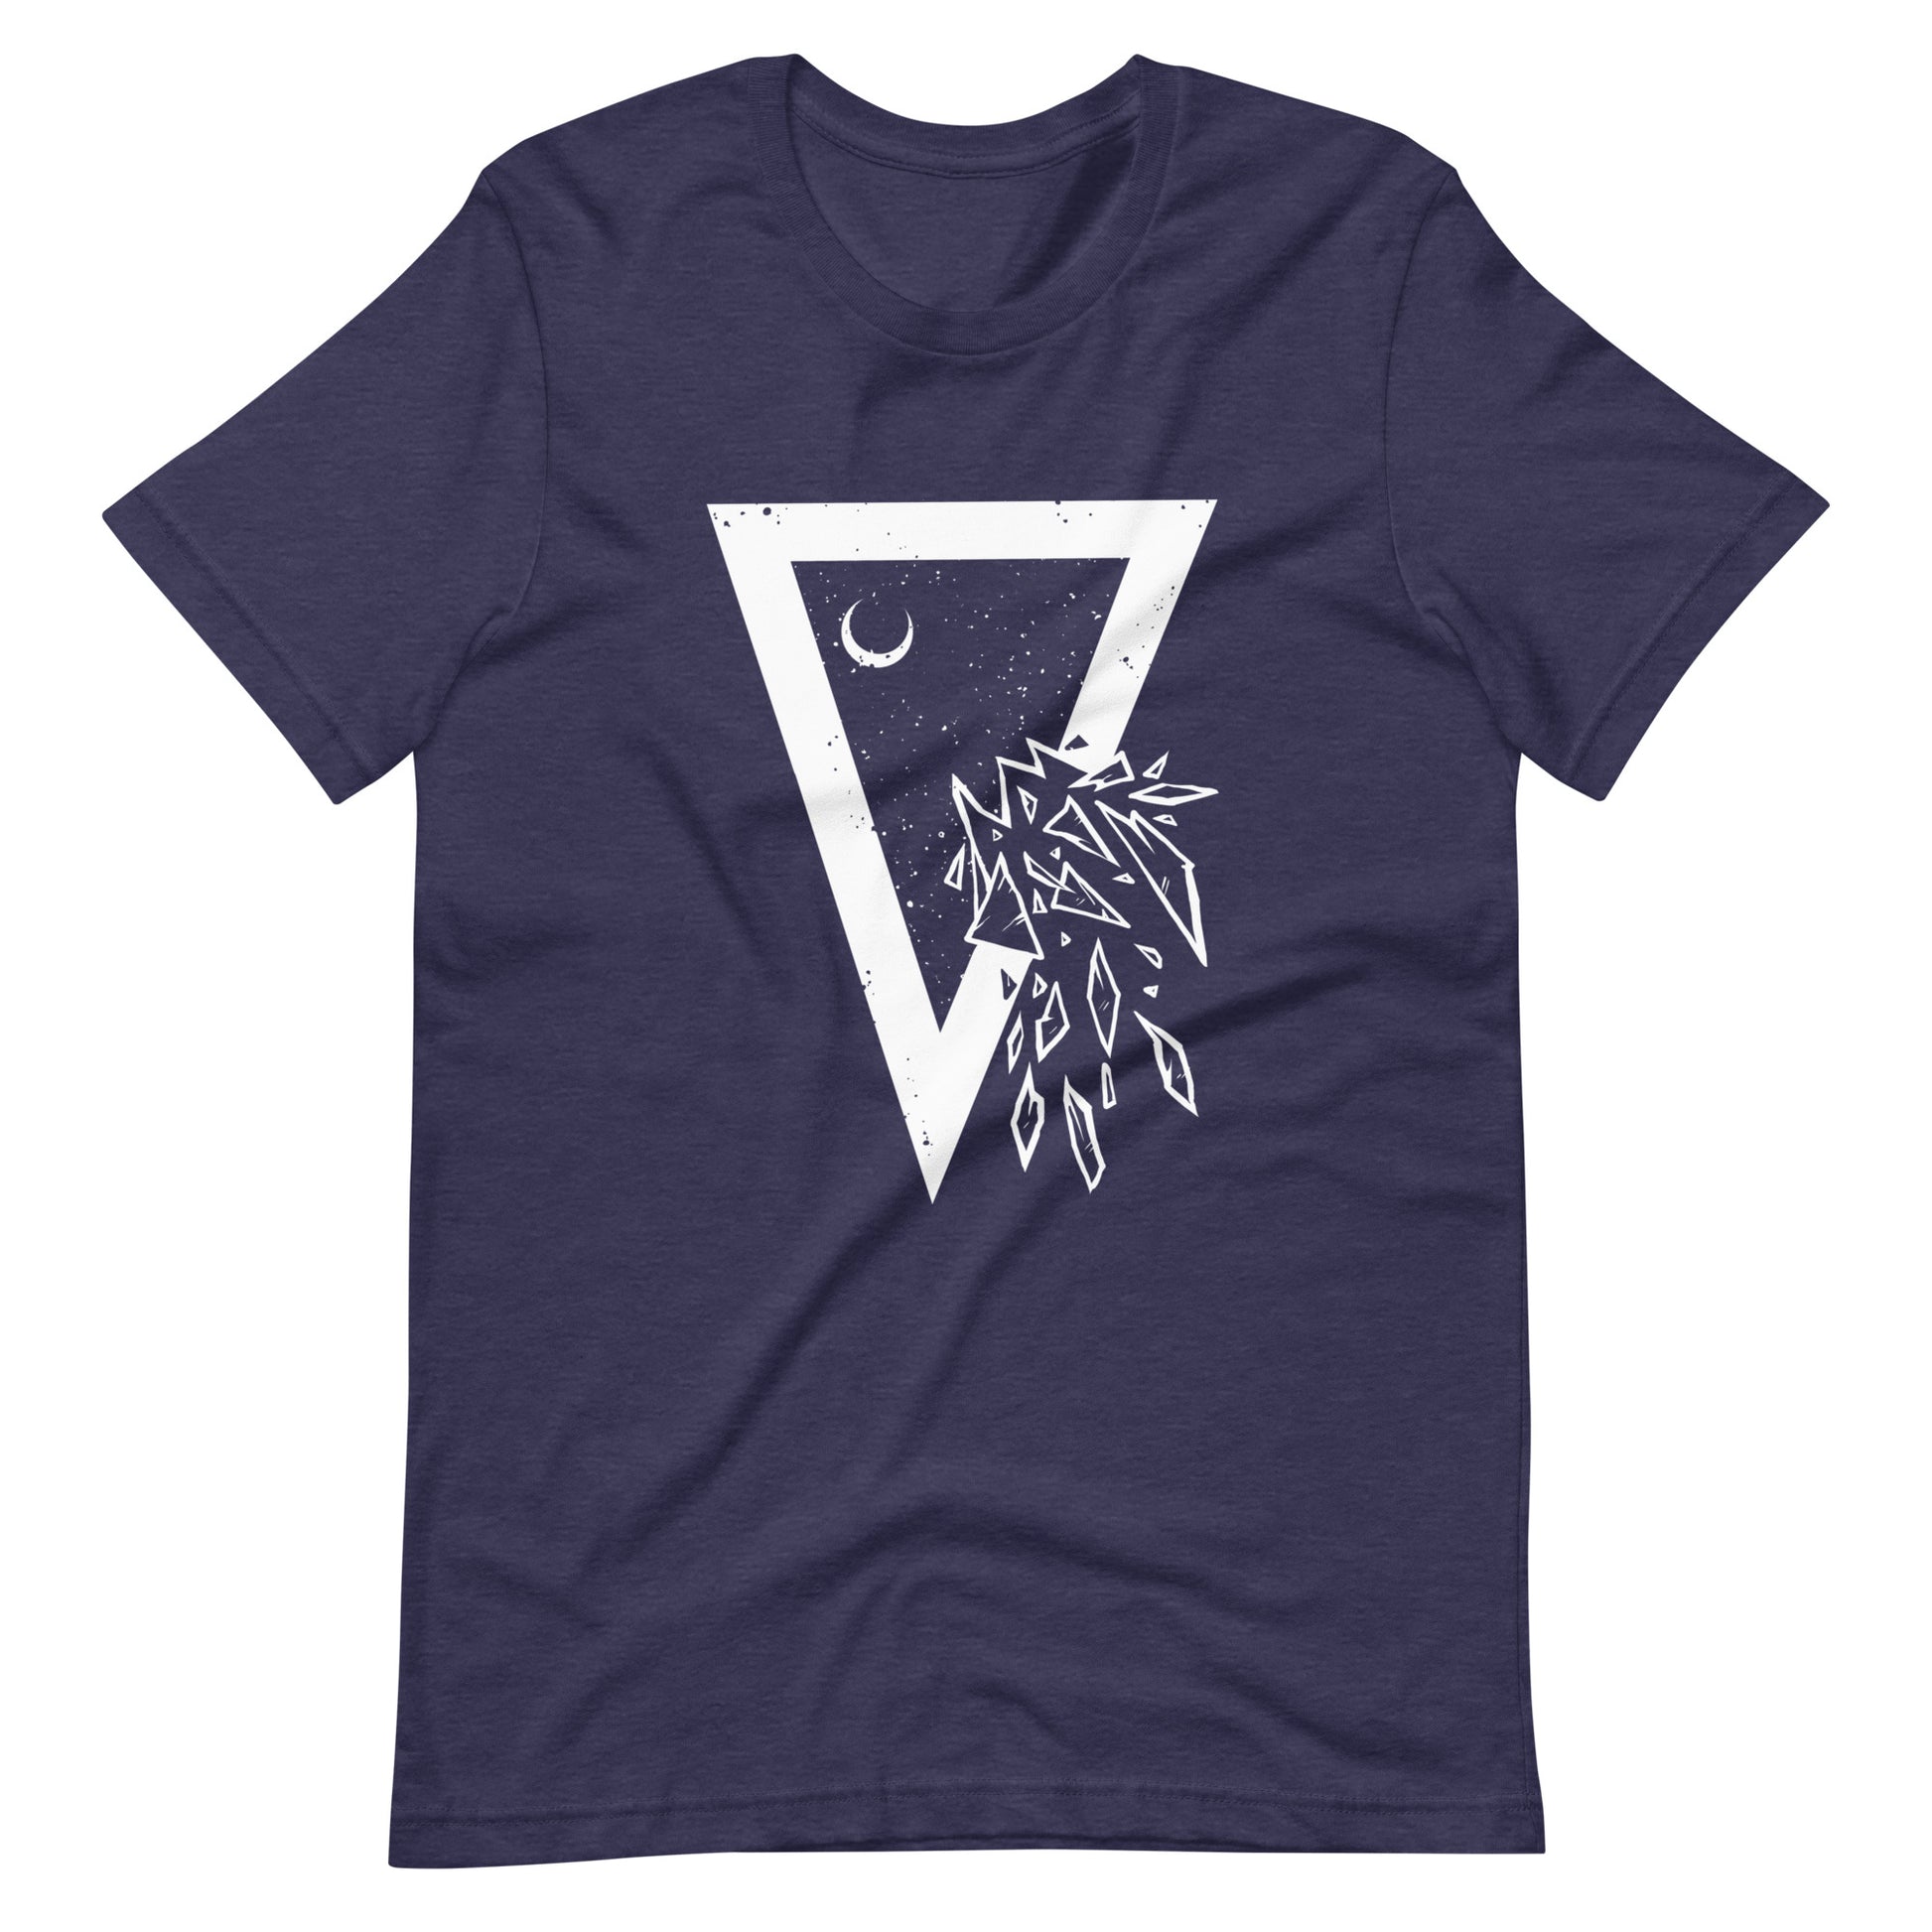 Glass Ceiling - Men's t-shirt - Heather Midnight Navy Front